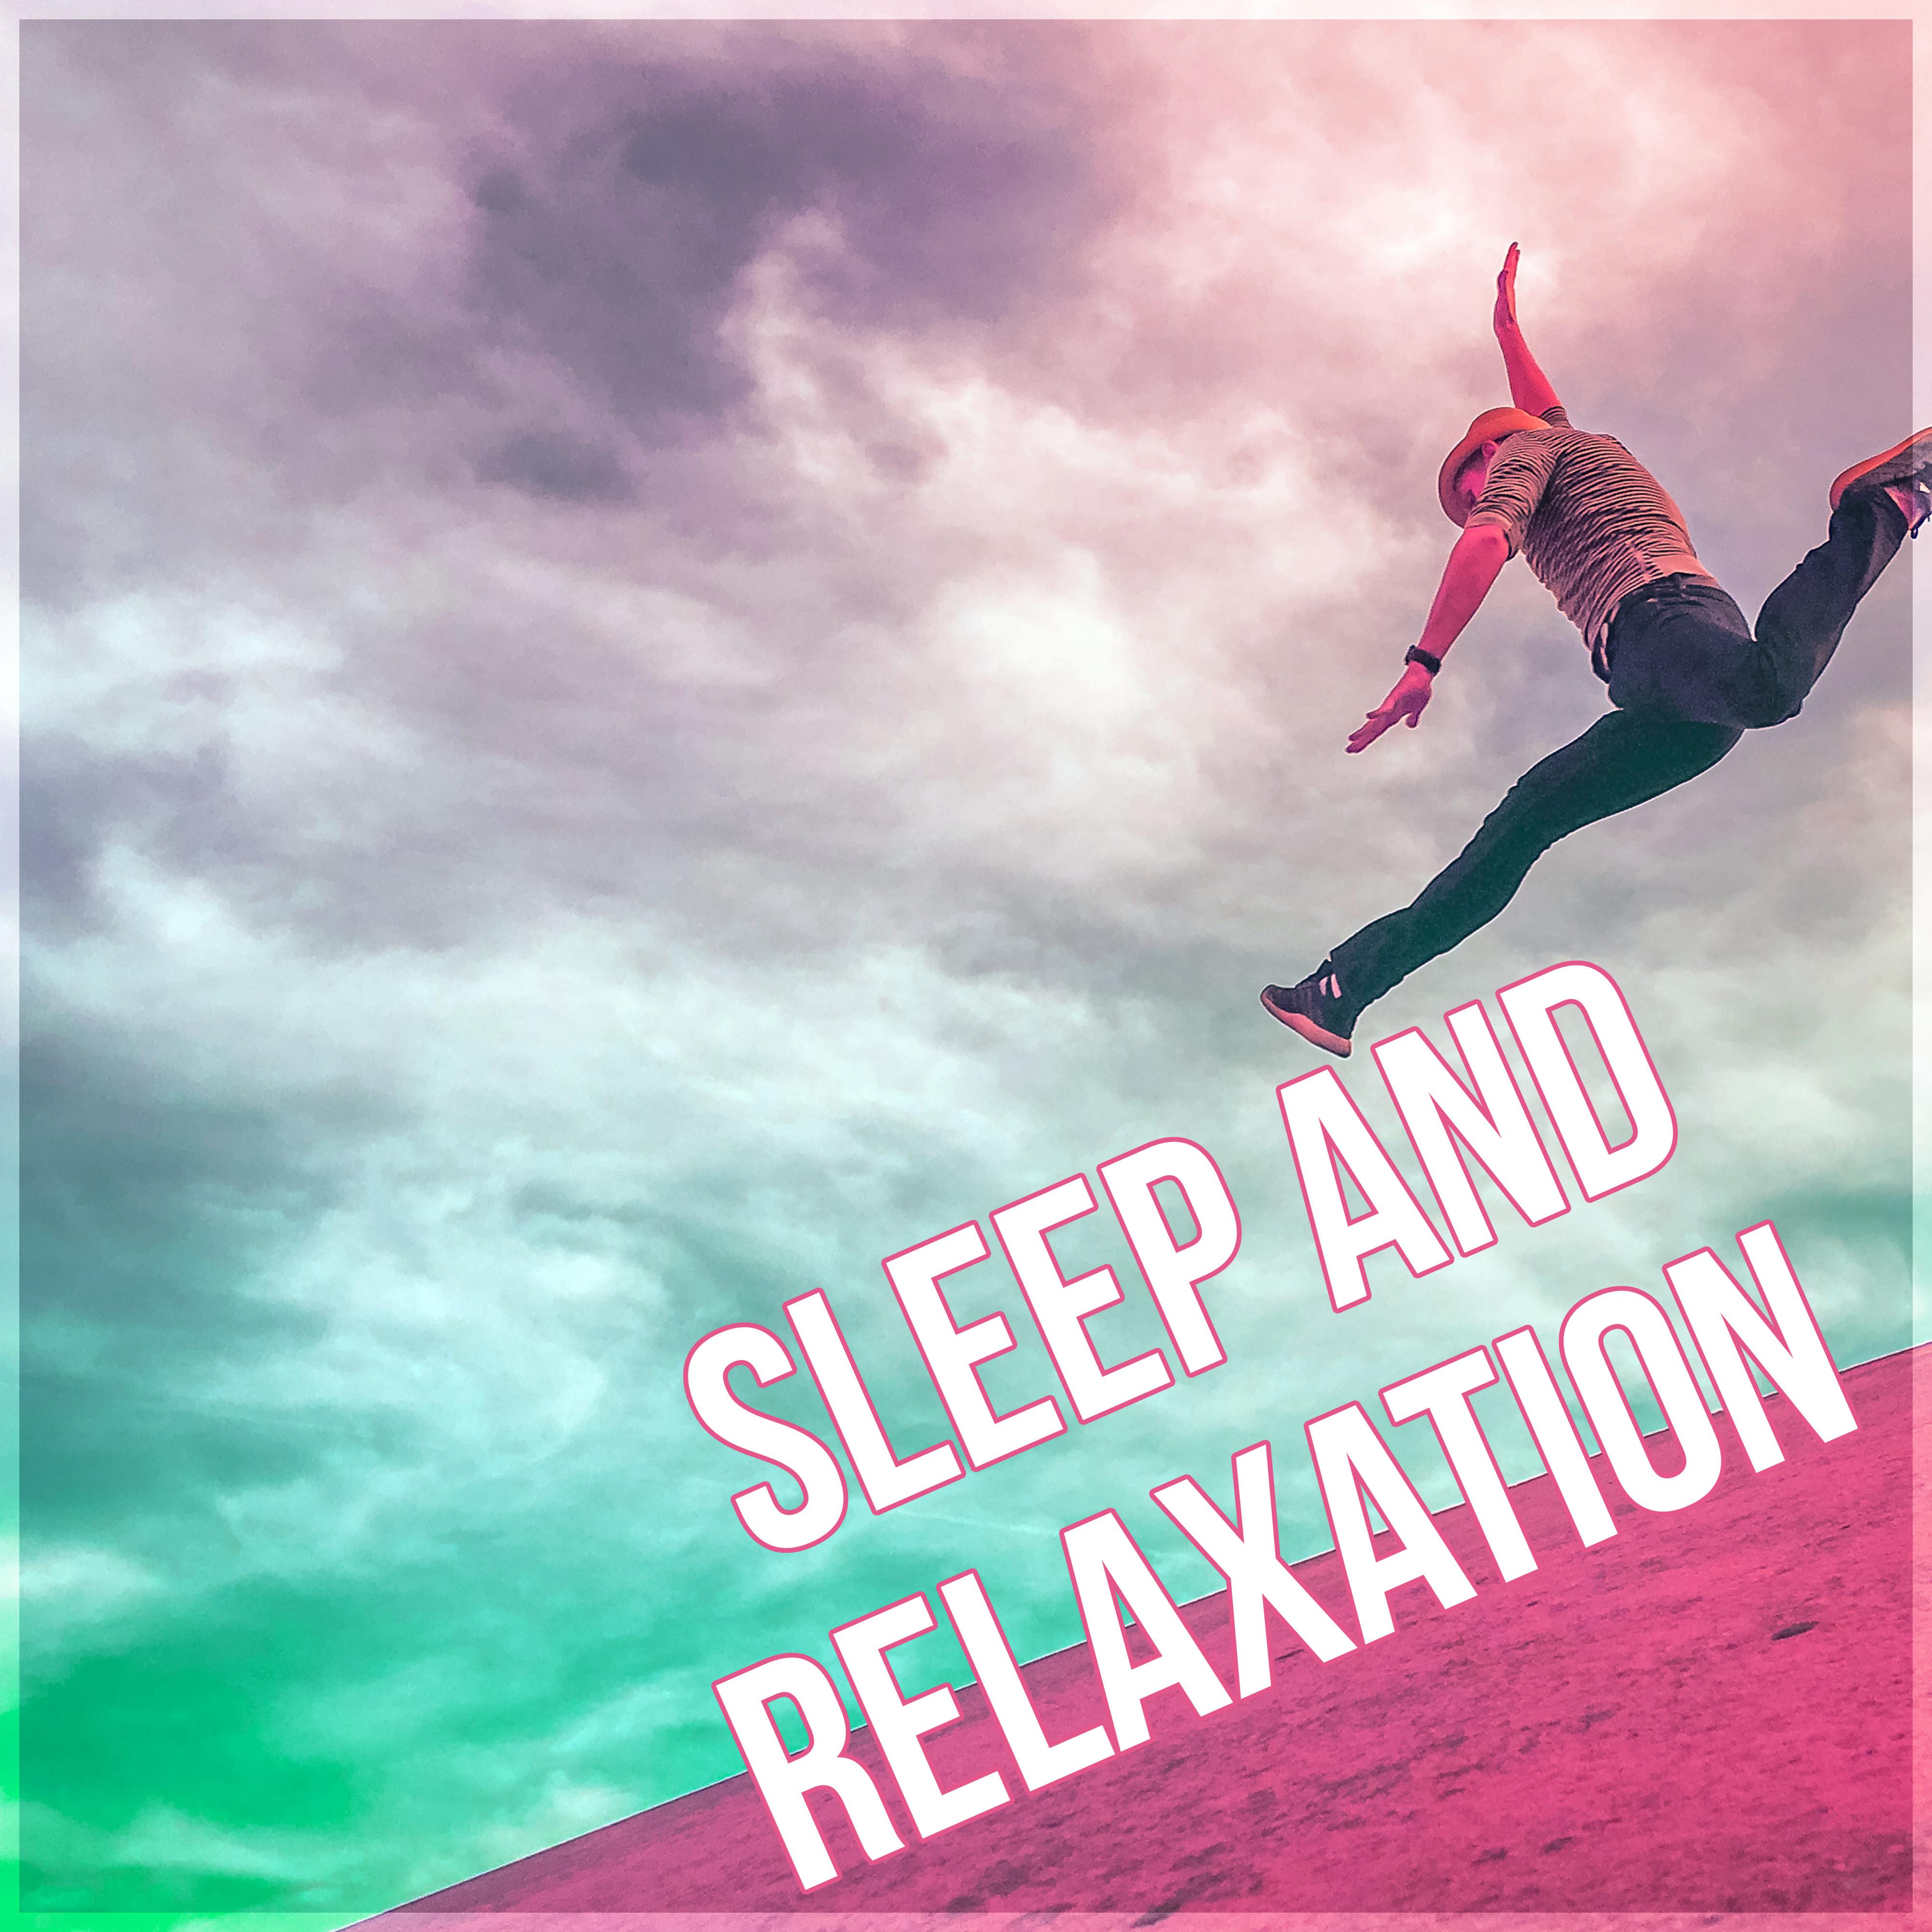 Sleep and Relaxation - Beauty Collection Sounds of Nature, Serenity Spa, Wellness, Relaxation Meditation, Inner Peace, Soothing Sounds, Massage Music